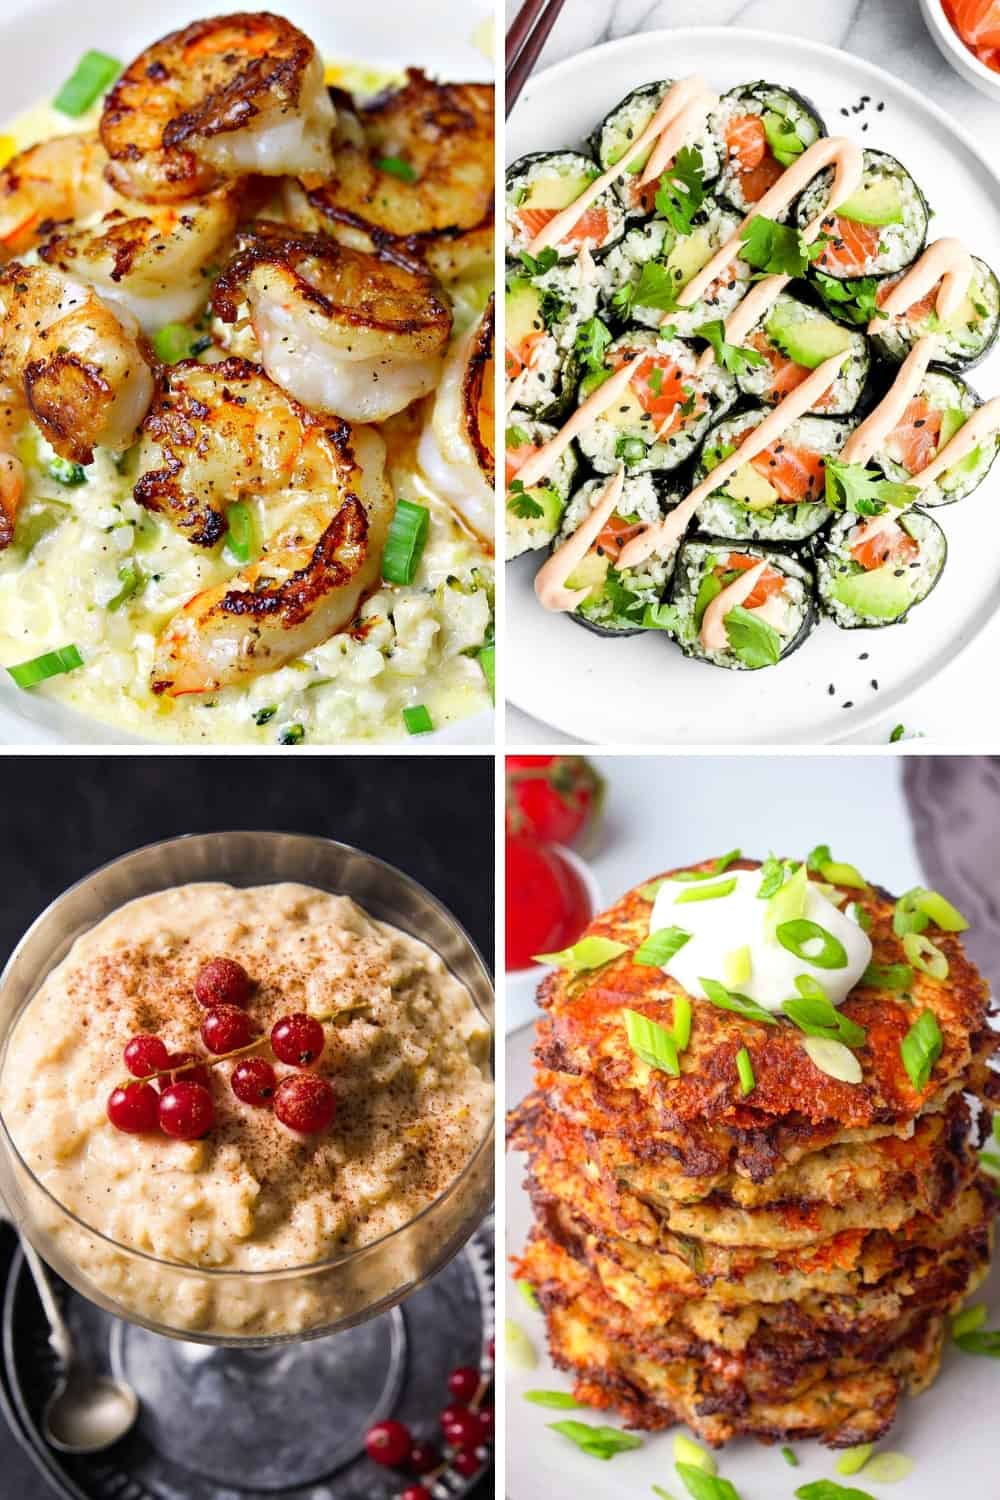 cauliflower rice recipes for every meal like cauliflower rice risotto with shrimp, cauliflower rice sushi, cauliflower rice hash browns, and cauliflower rice pudding